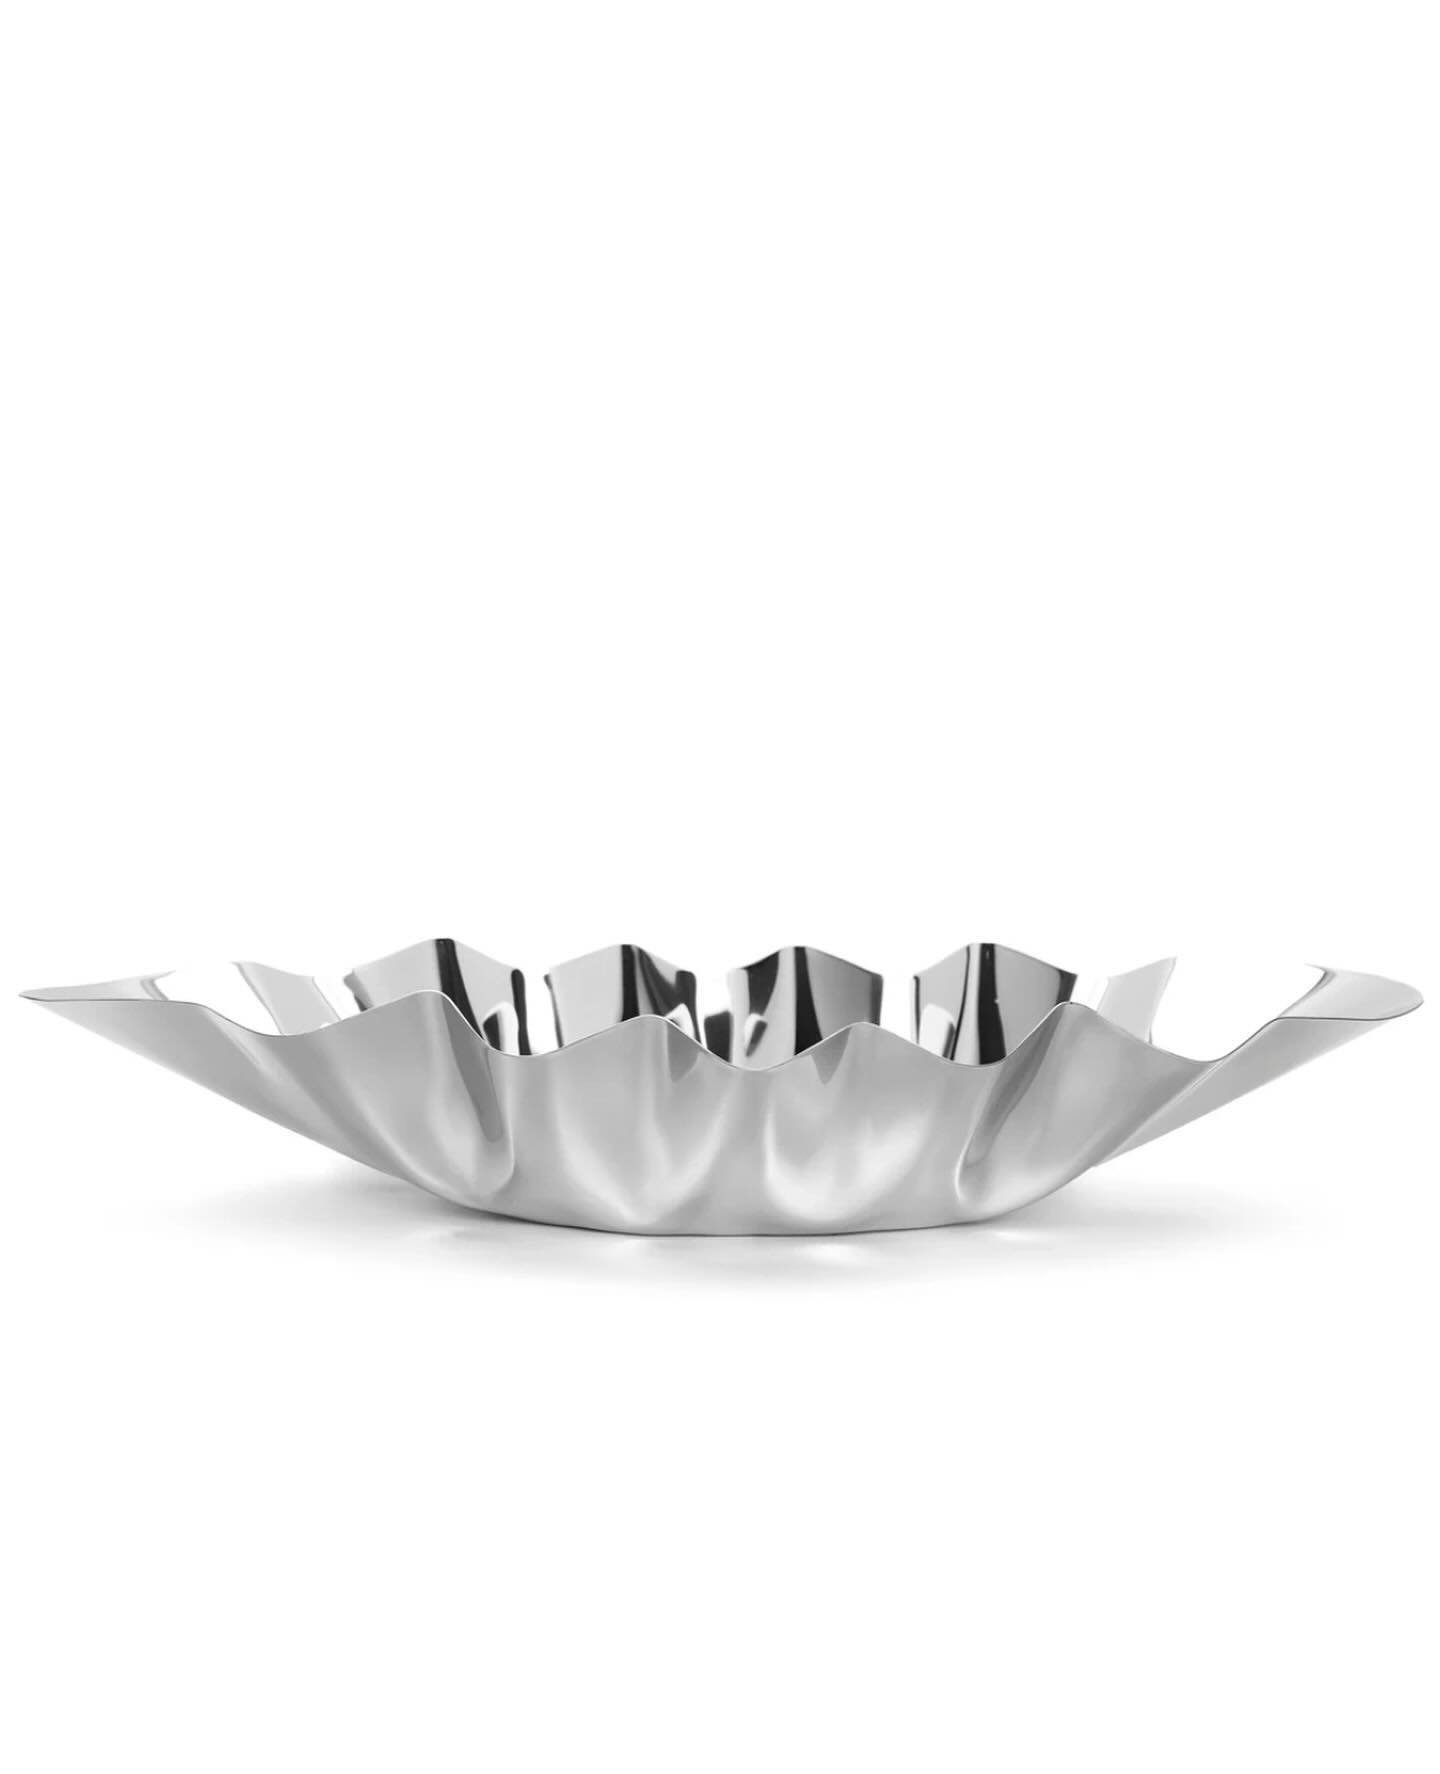 The perfect look and size for all your serving needs. Think cut up challah, cookies/rugelach or fruit. The possibilities are endless! 

#tray #stainlesstray #ruffledtray #challahtray #servingtray #stainlessplatter #servingpieces #tabledecor#homedecor